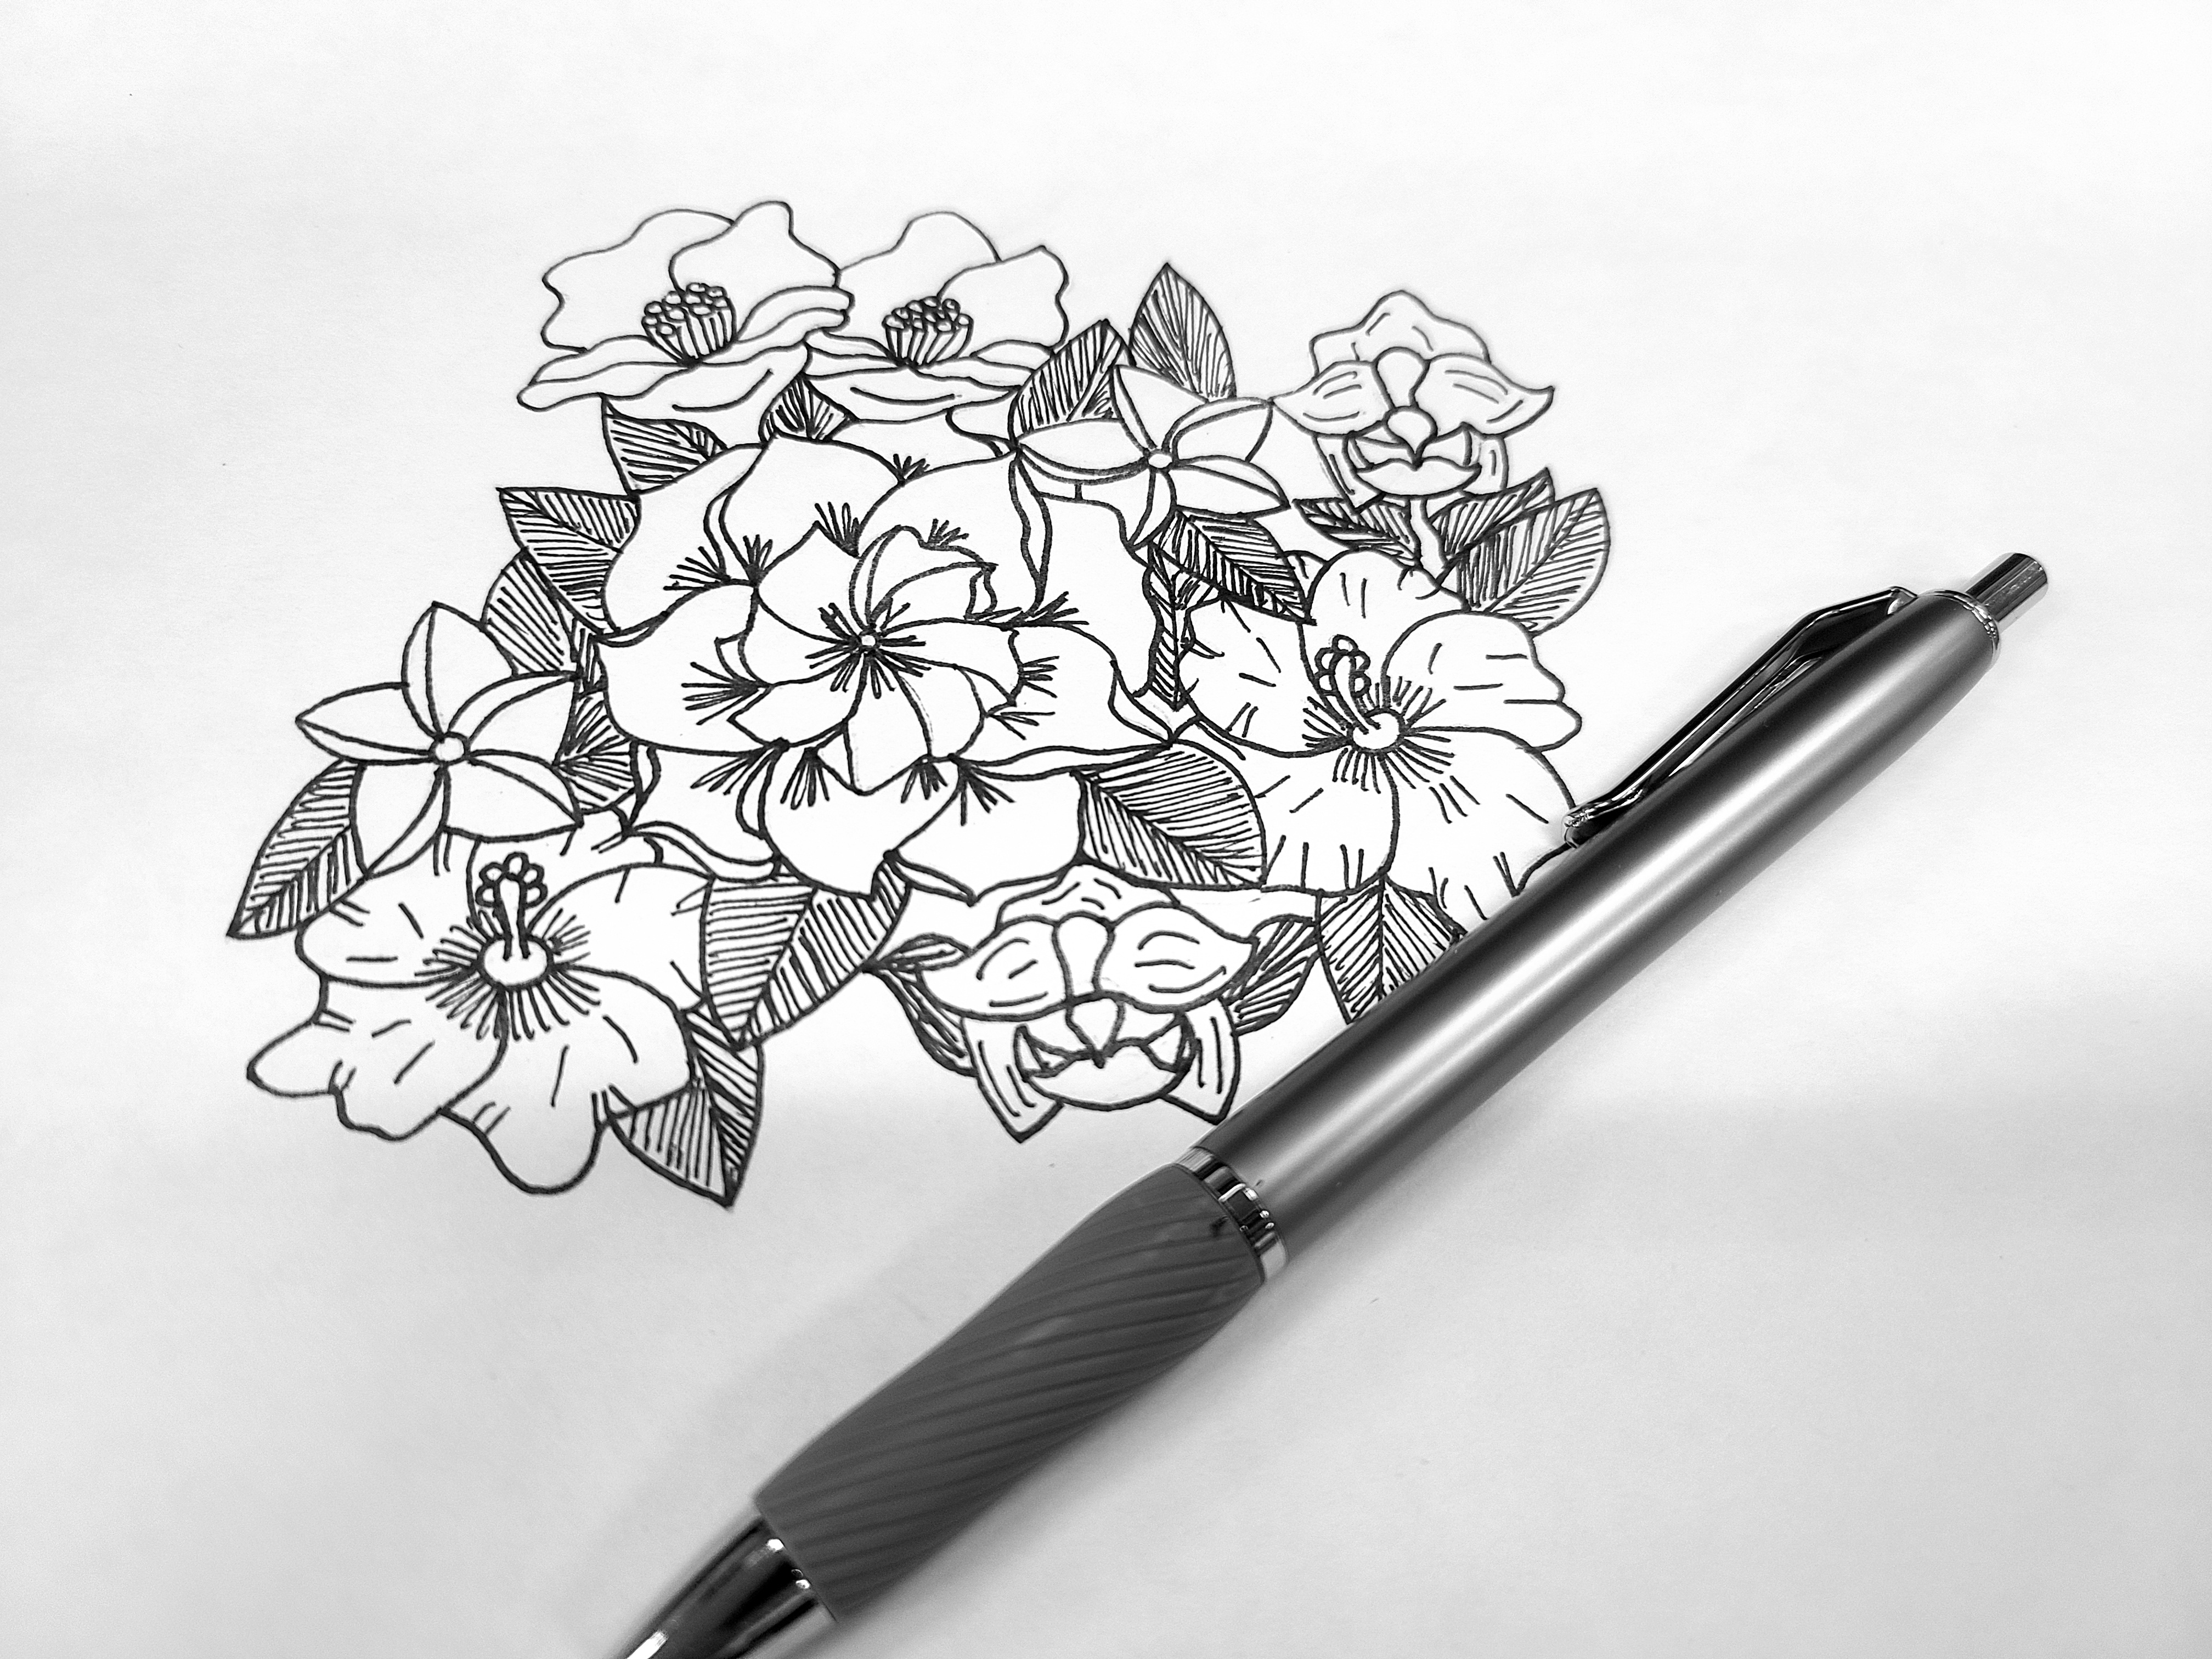 Black line drawing of flower grouping and a silver pen